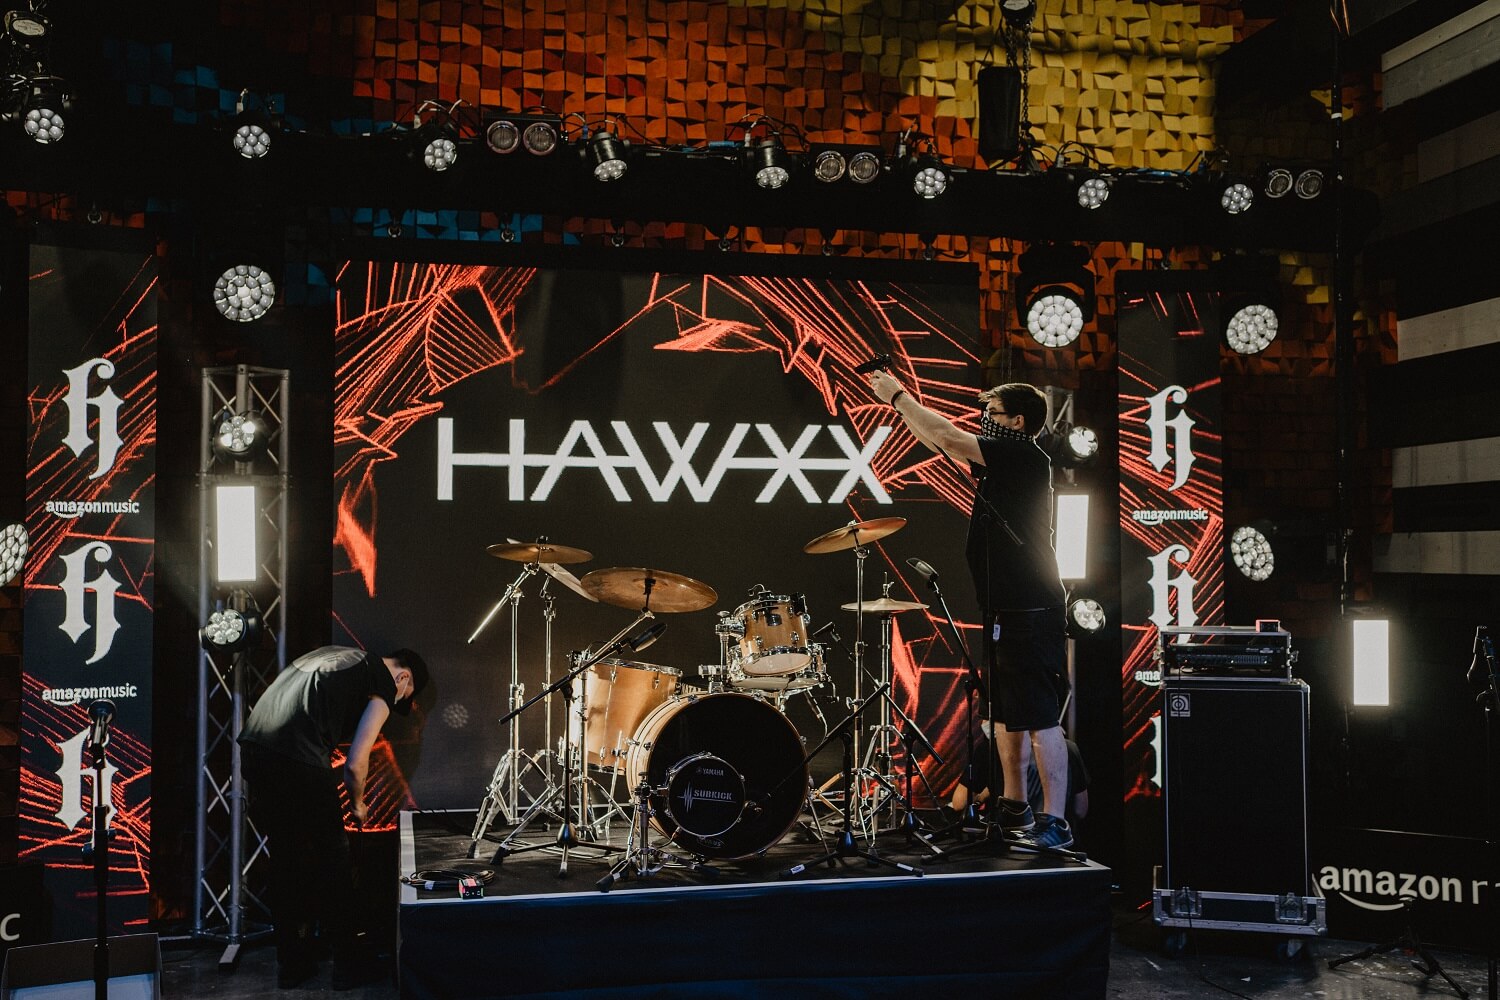 Live music build day ahead of Heavy Music Awards 2020